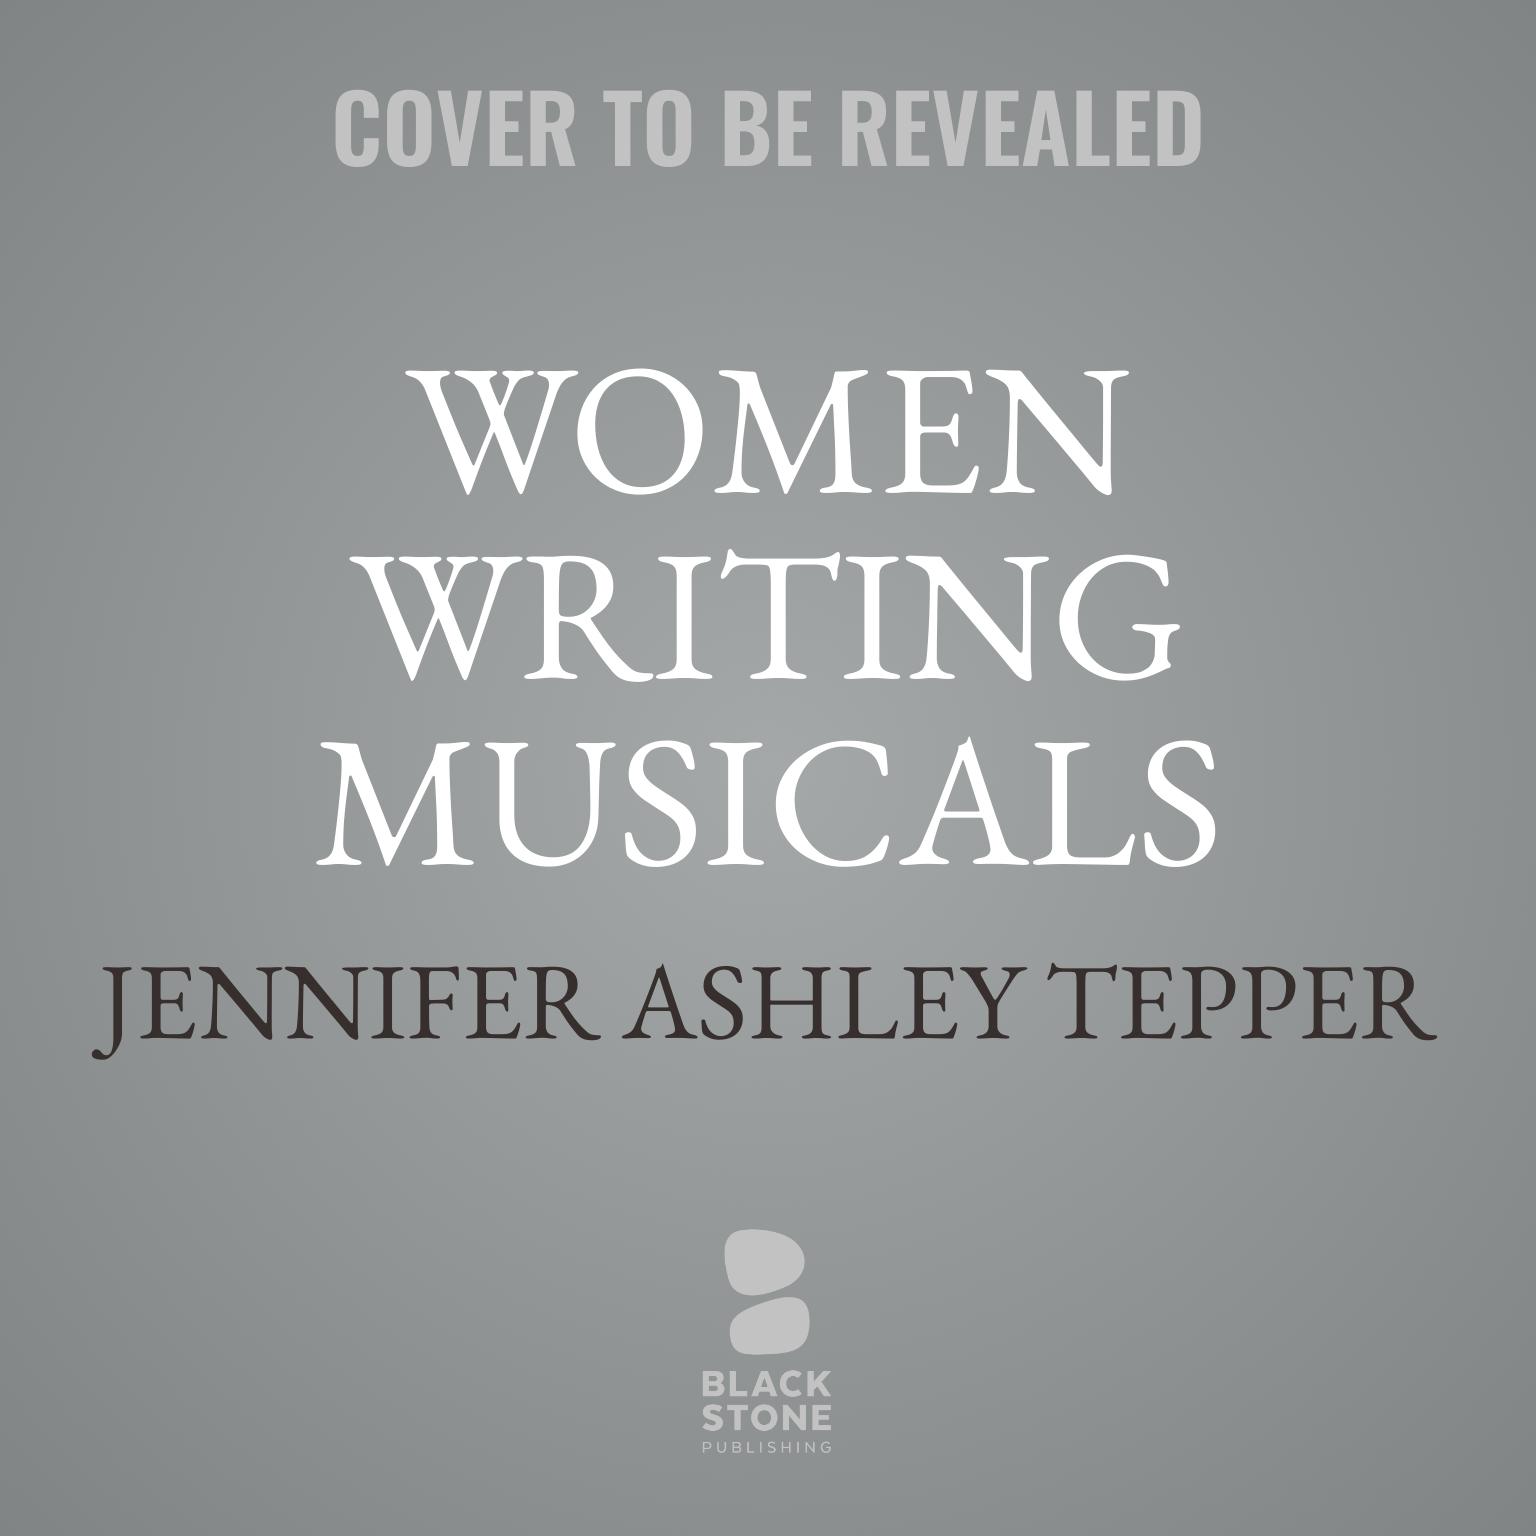 Women Writing Musicals: The Legacy That the History Books Left Out  Audiobook, by Jennifer Ashley Tepper